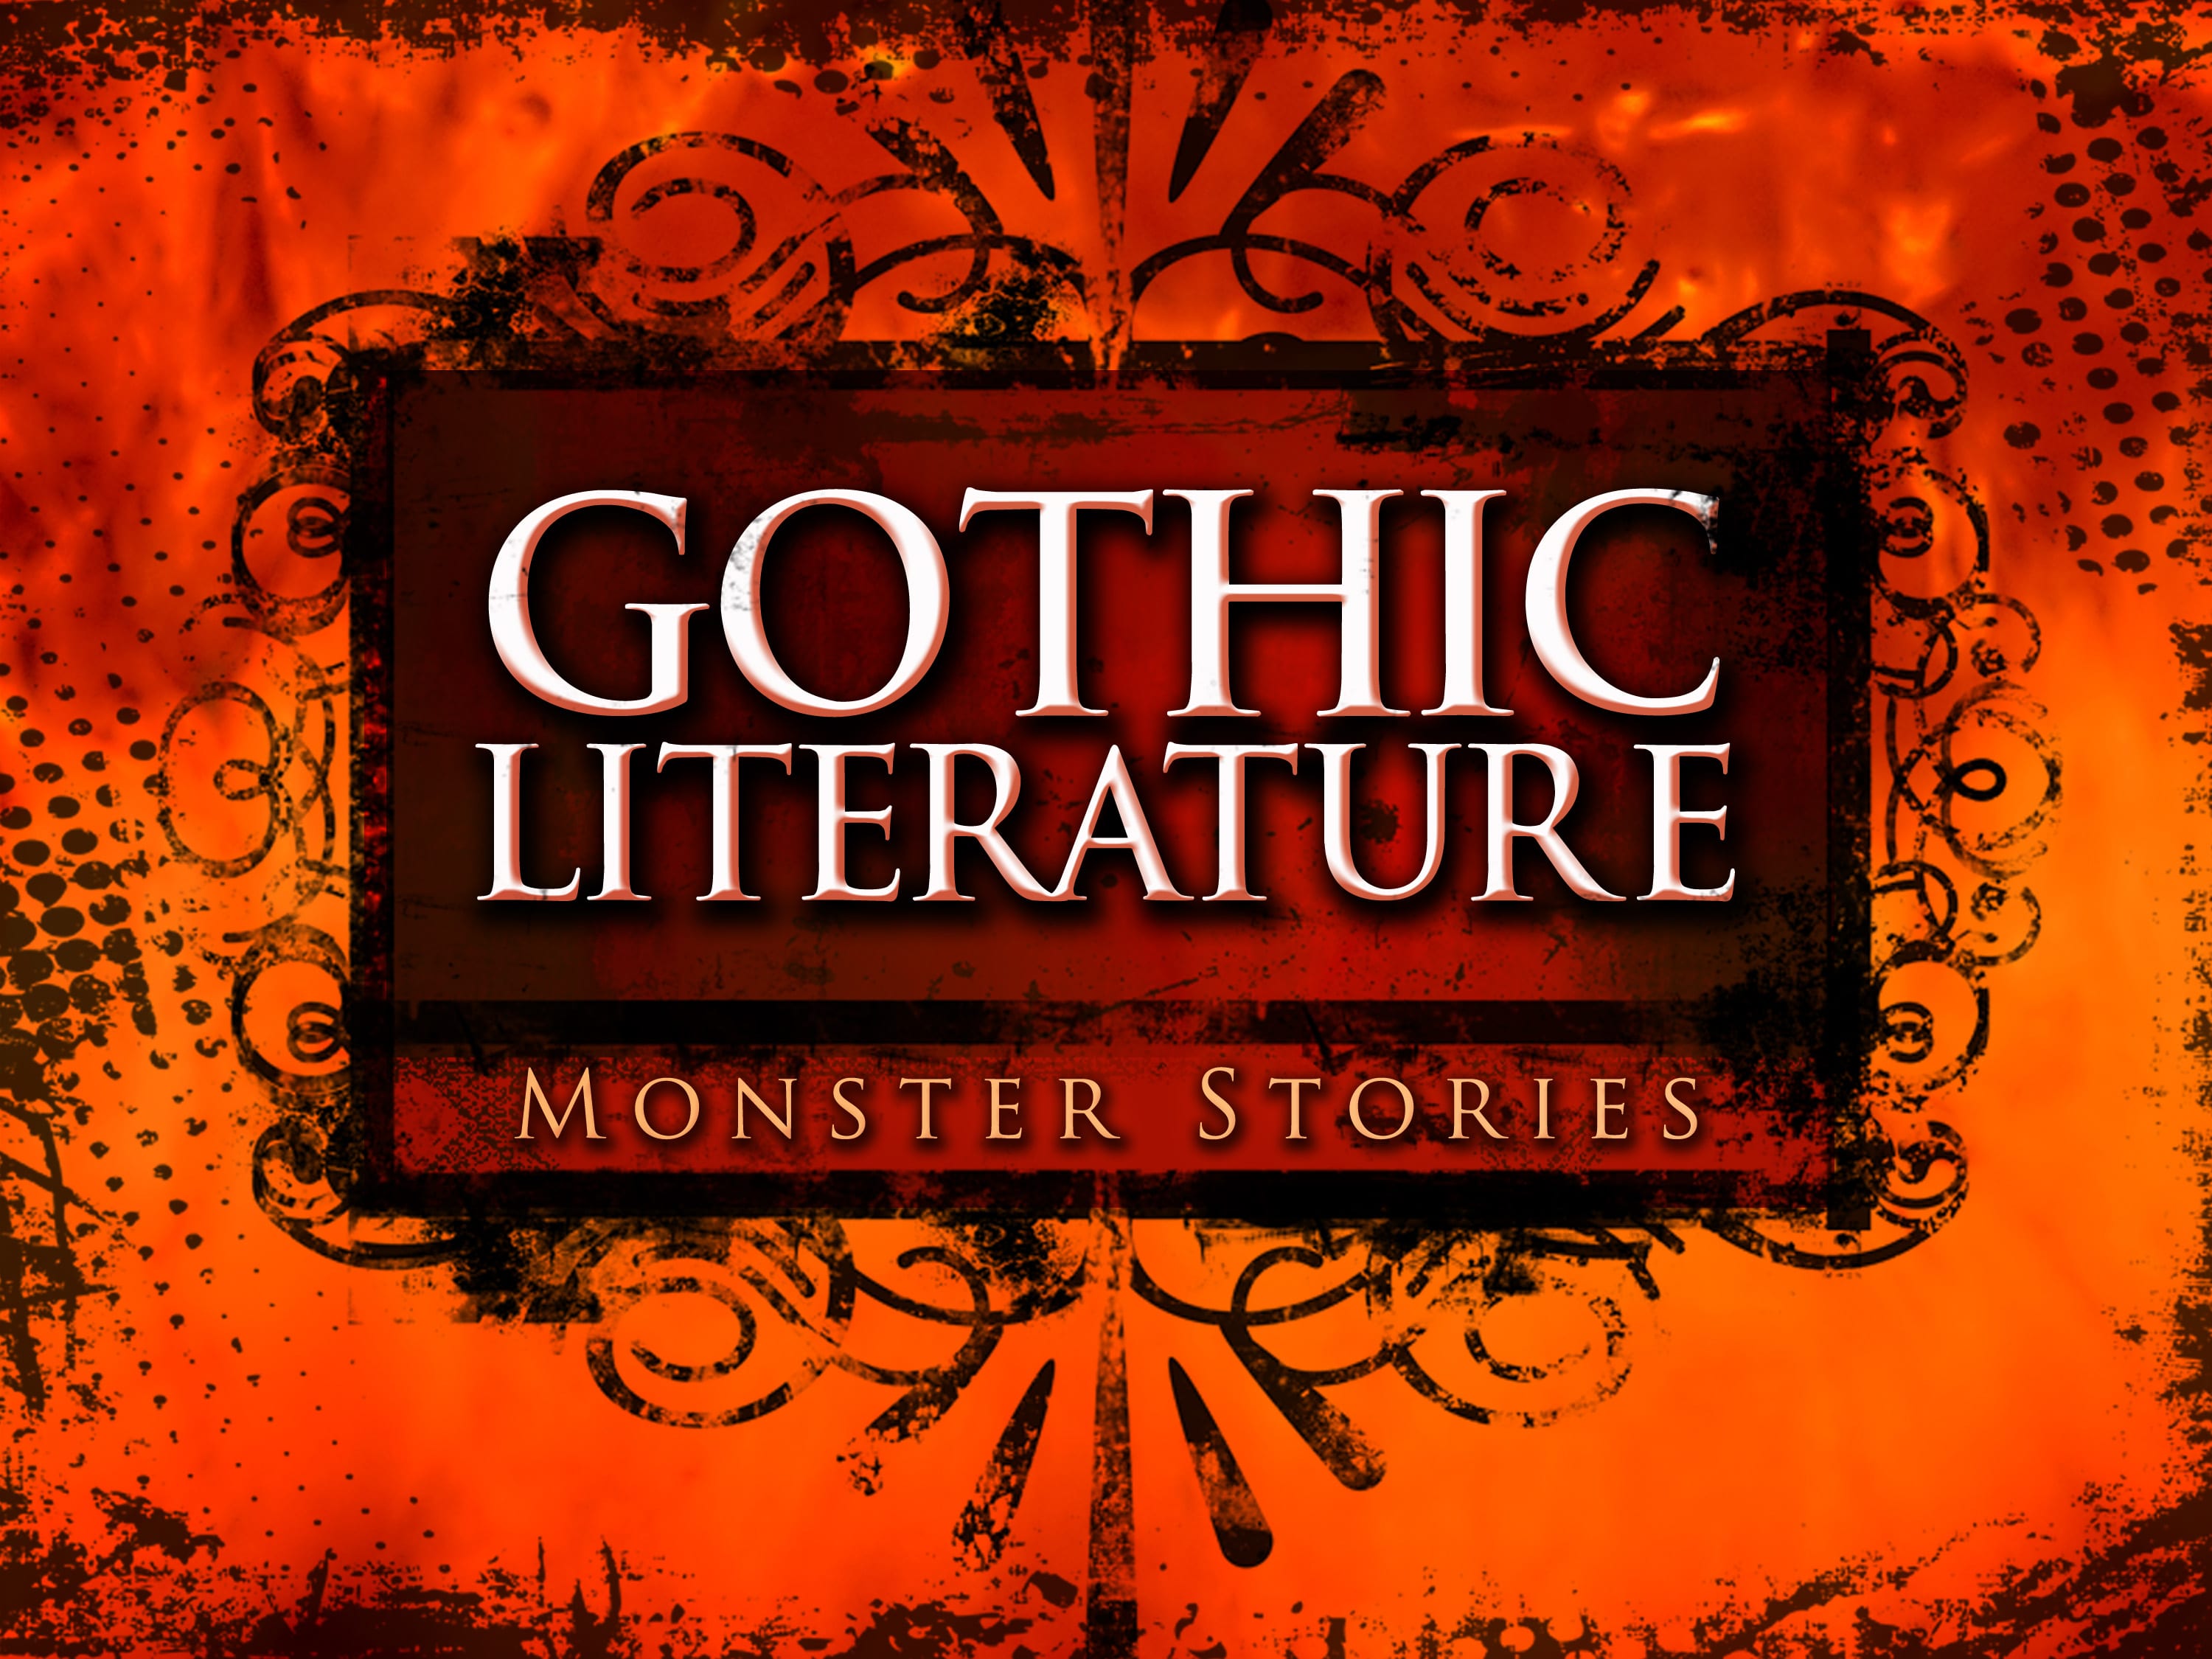 Which is an important element of gothic fiction